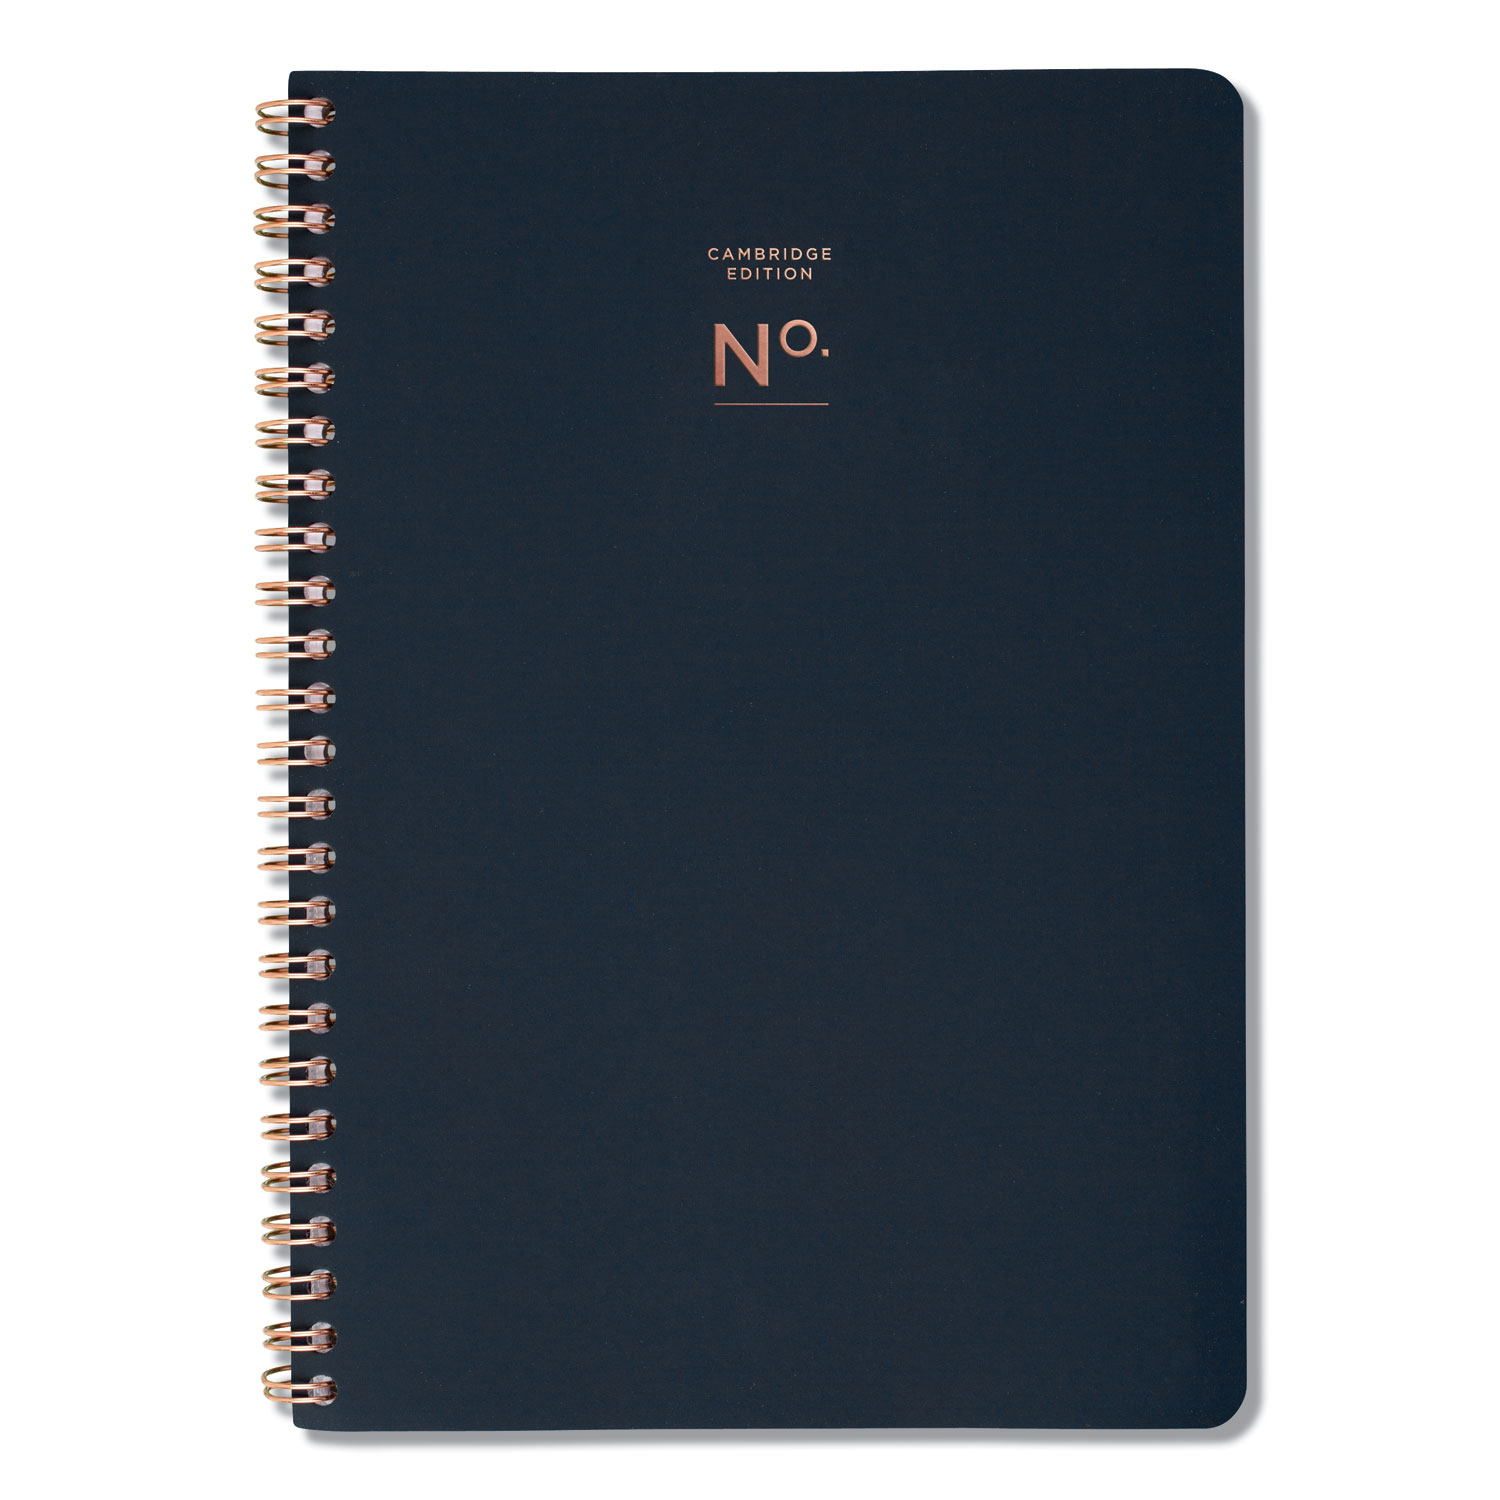  Cambridge 528020058 Workstyle Soft Cover Weekly/Monthly Planner, 8 1/2 x 5 1/2, Navy Cover, 2020 (AAG528020058) 